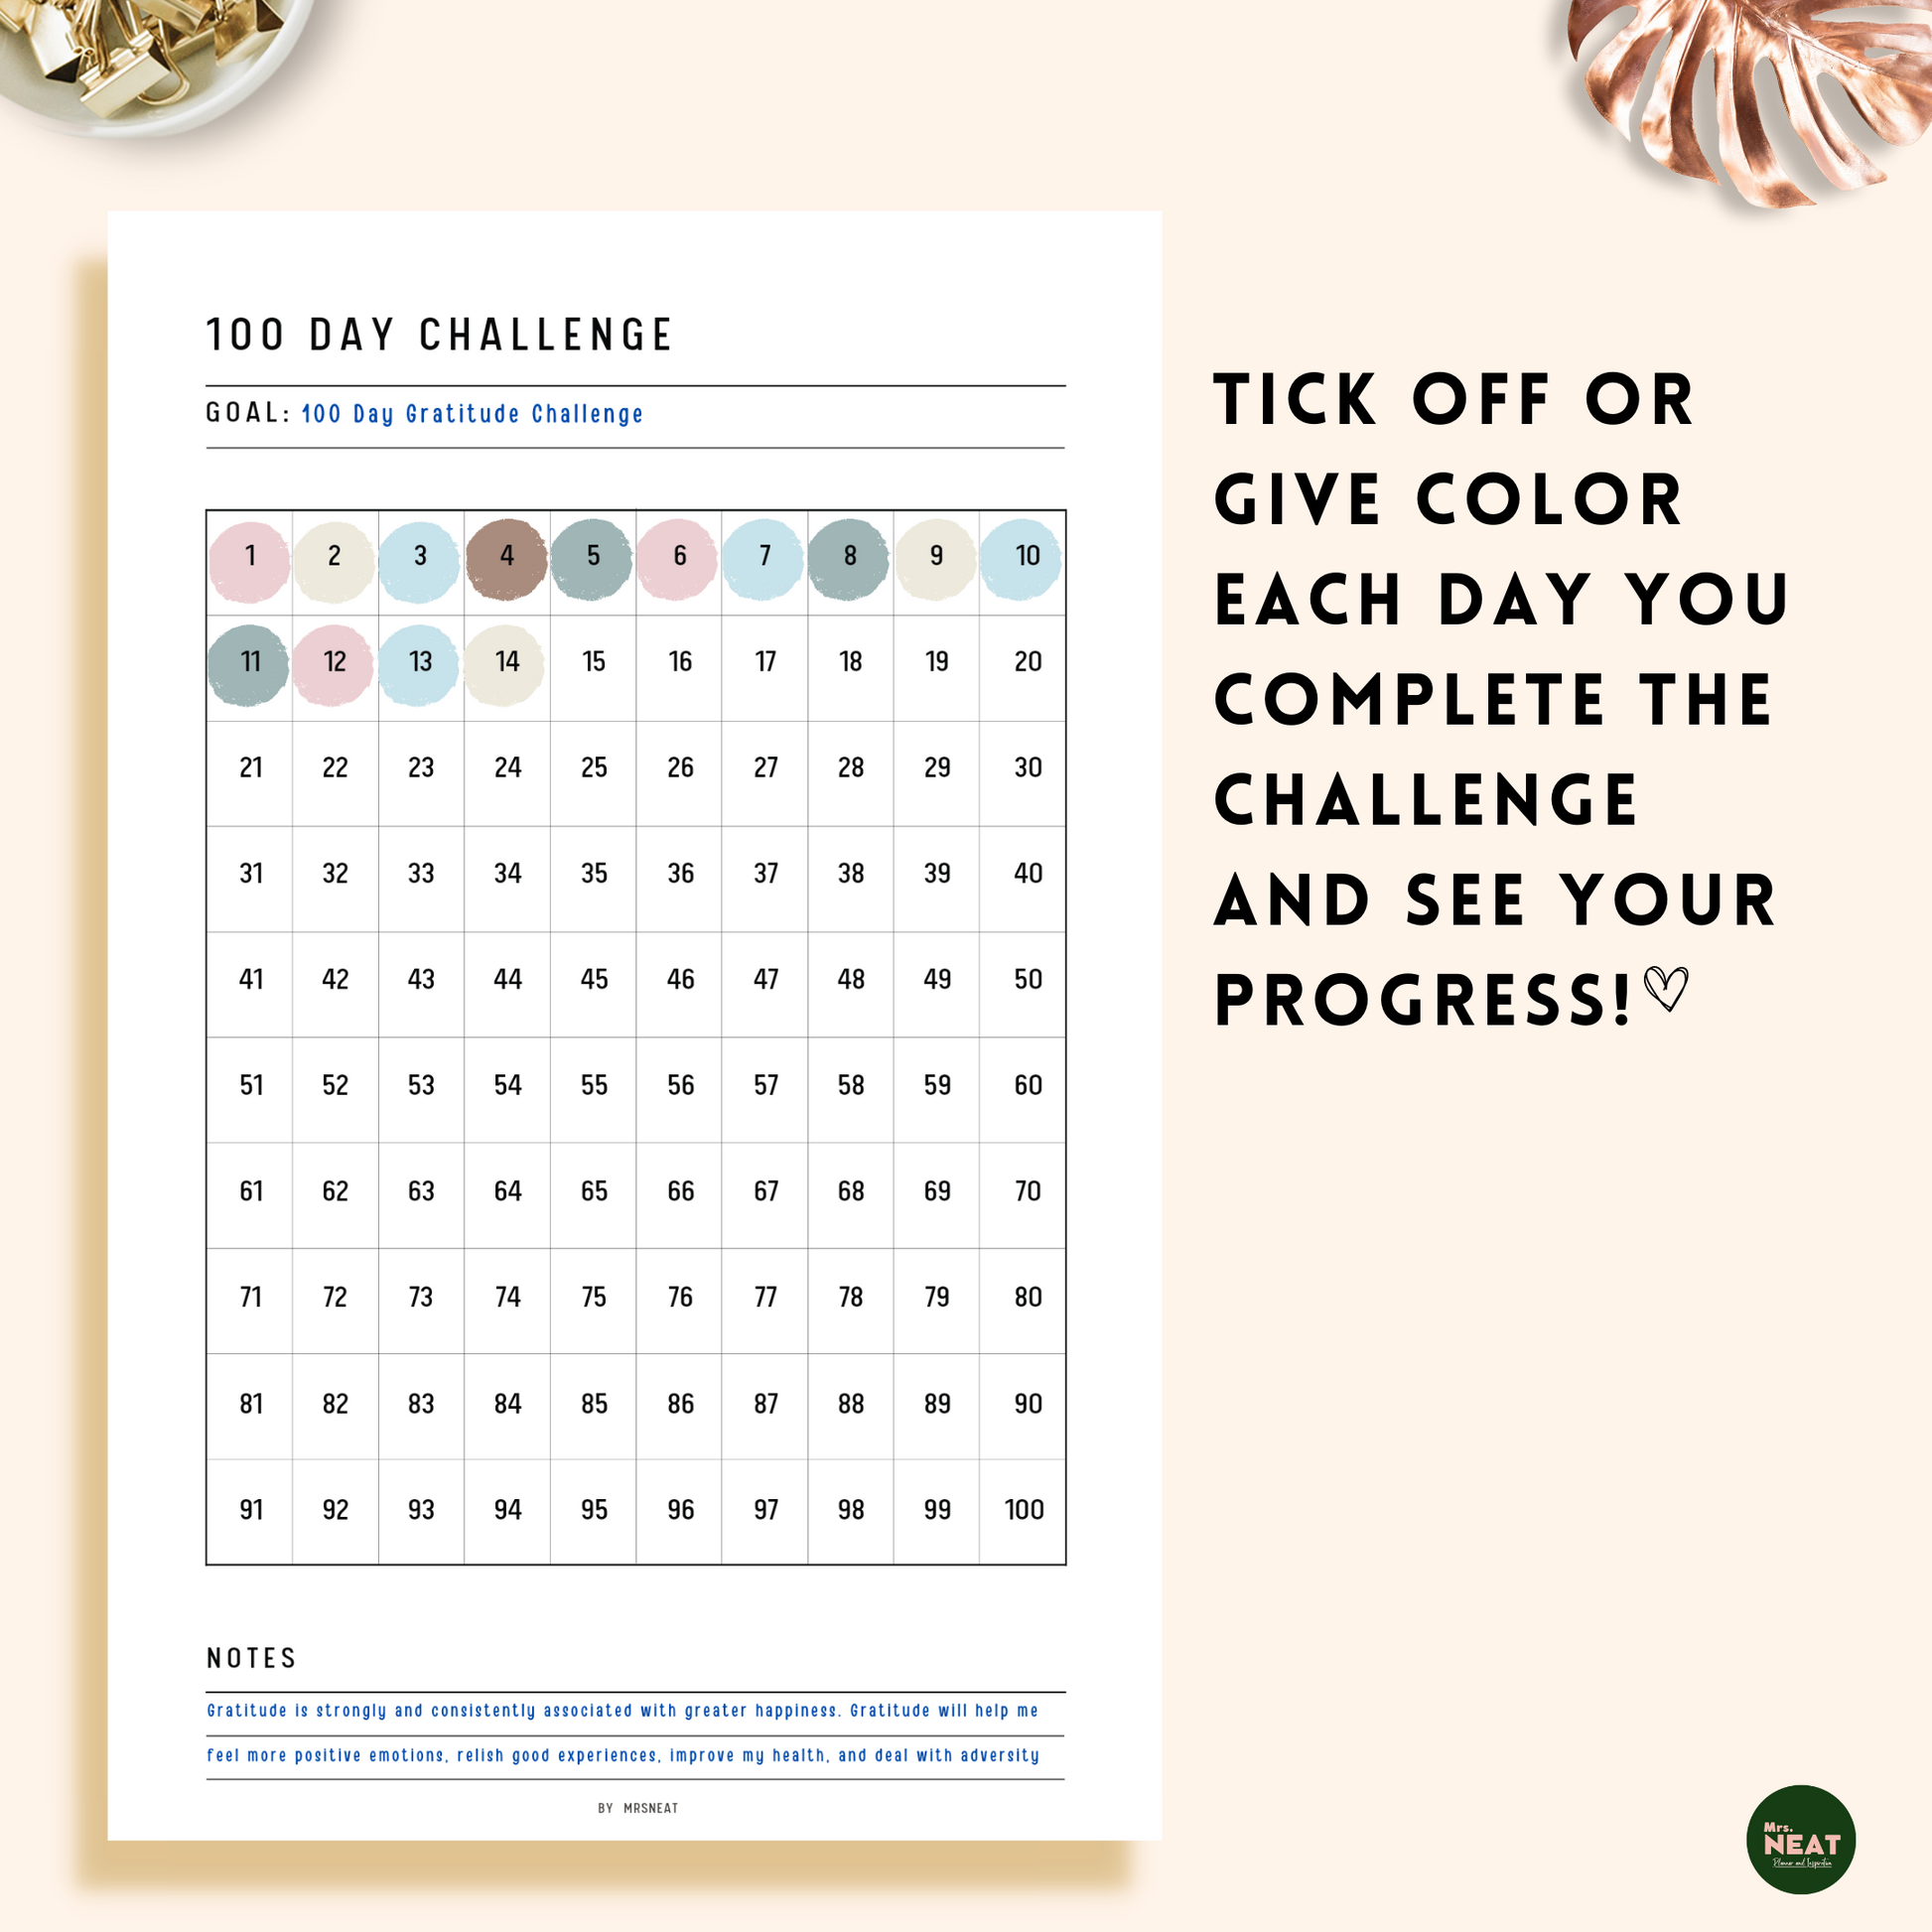 Colorful day column on the Minimalist 100 Day Challenge Habit Tracker Printable Planner